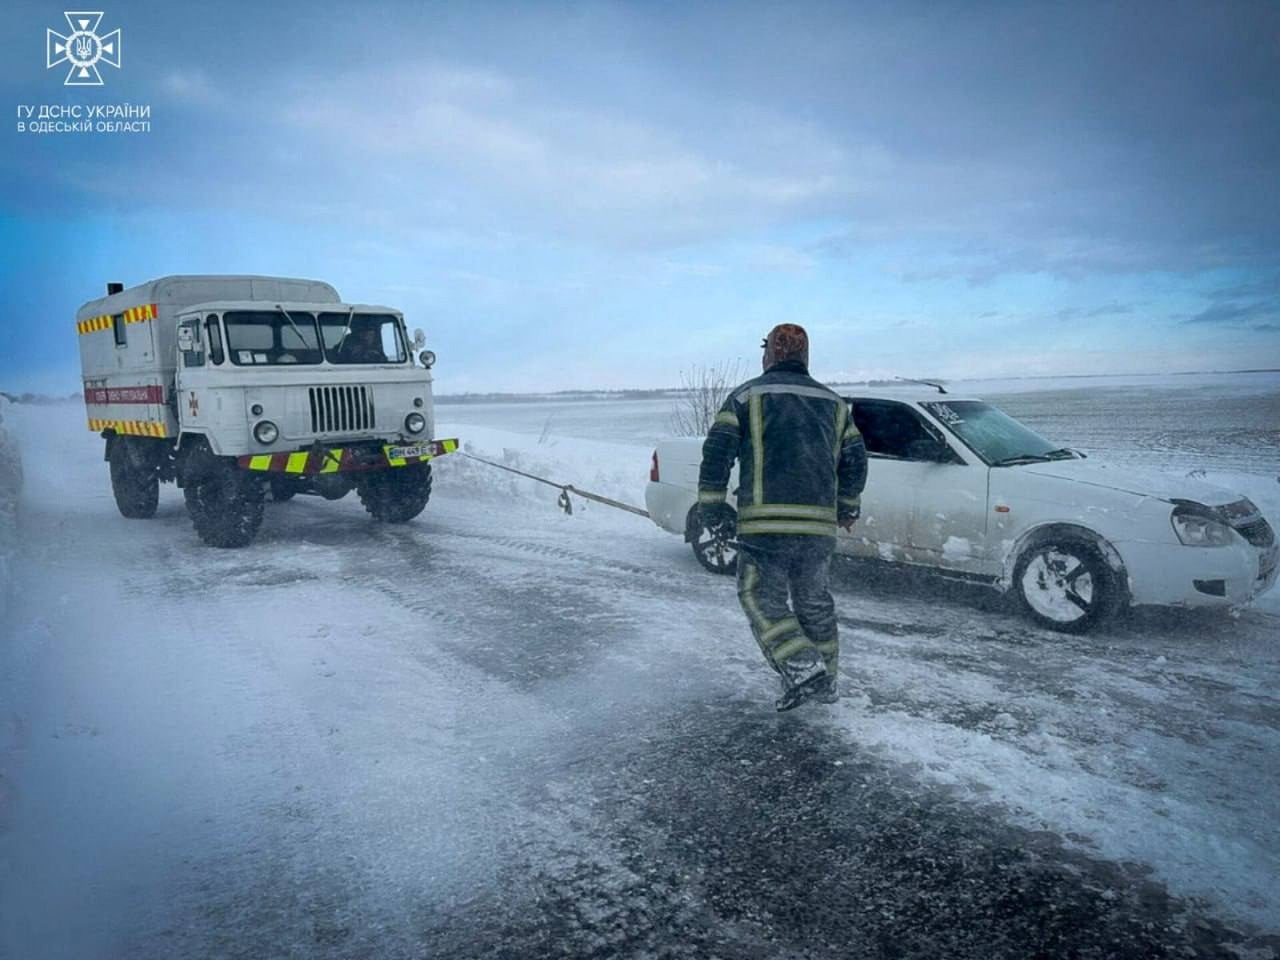 Emergency workers release a car stuck in snow in the Odesa region of Ukraine on Tuesday